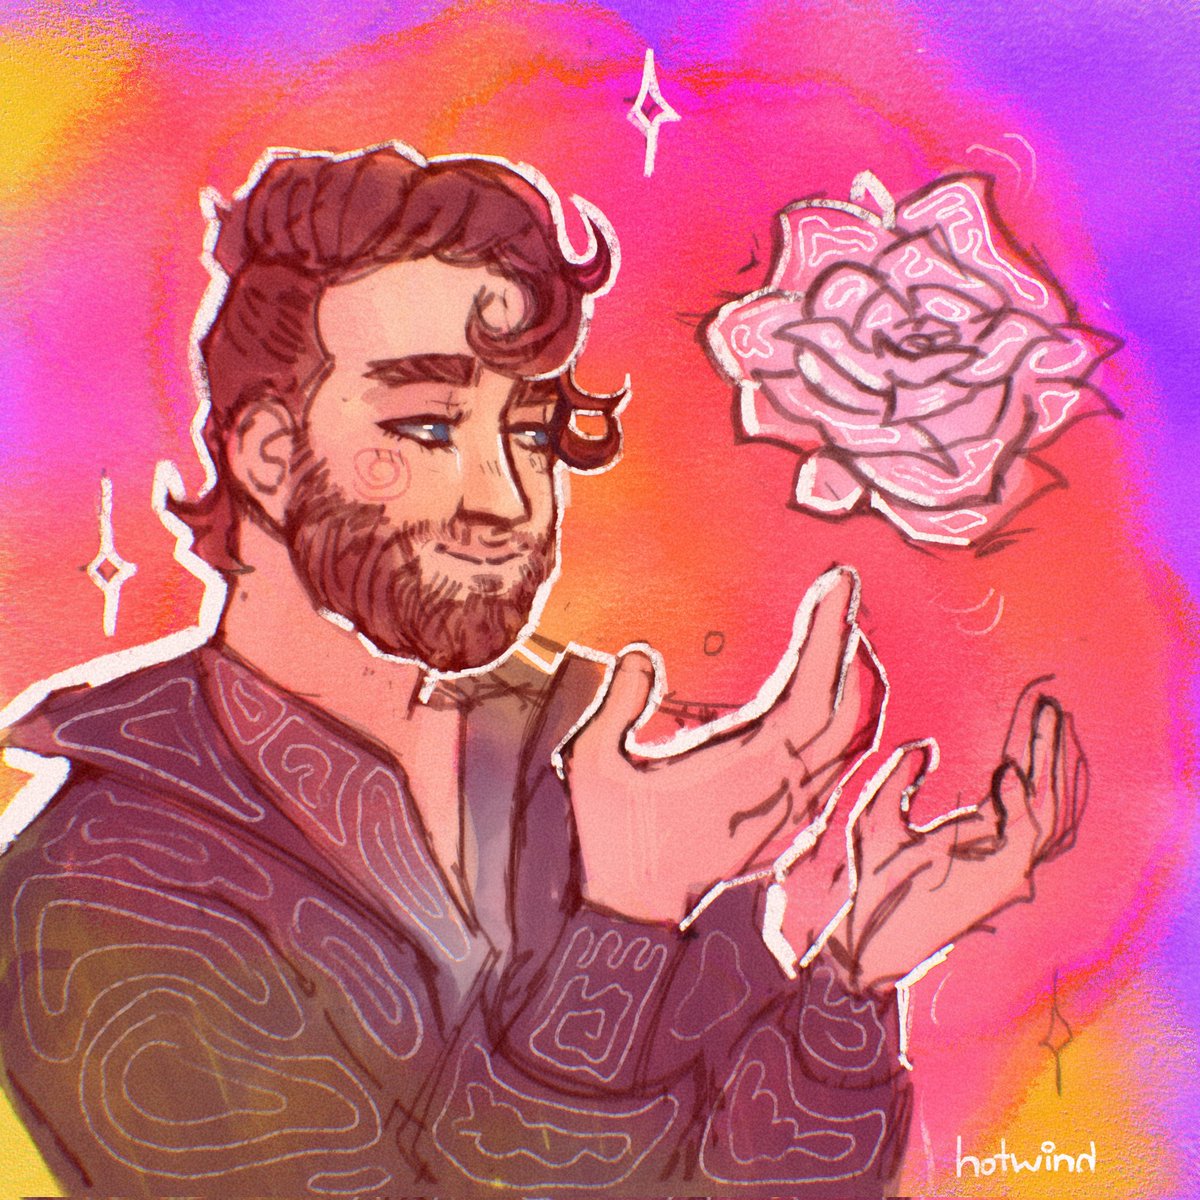 Haven't sketched for a while but @DanielPlatzman inspired me SO much with the score teaser, so here I am 💫 with a flower as a metaphor of art, of something created with care and passion 🌟